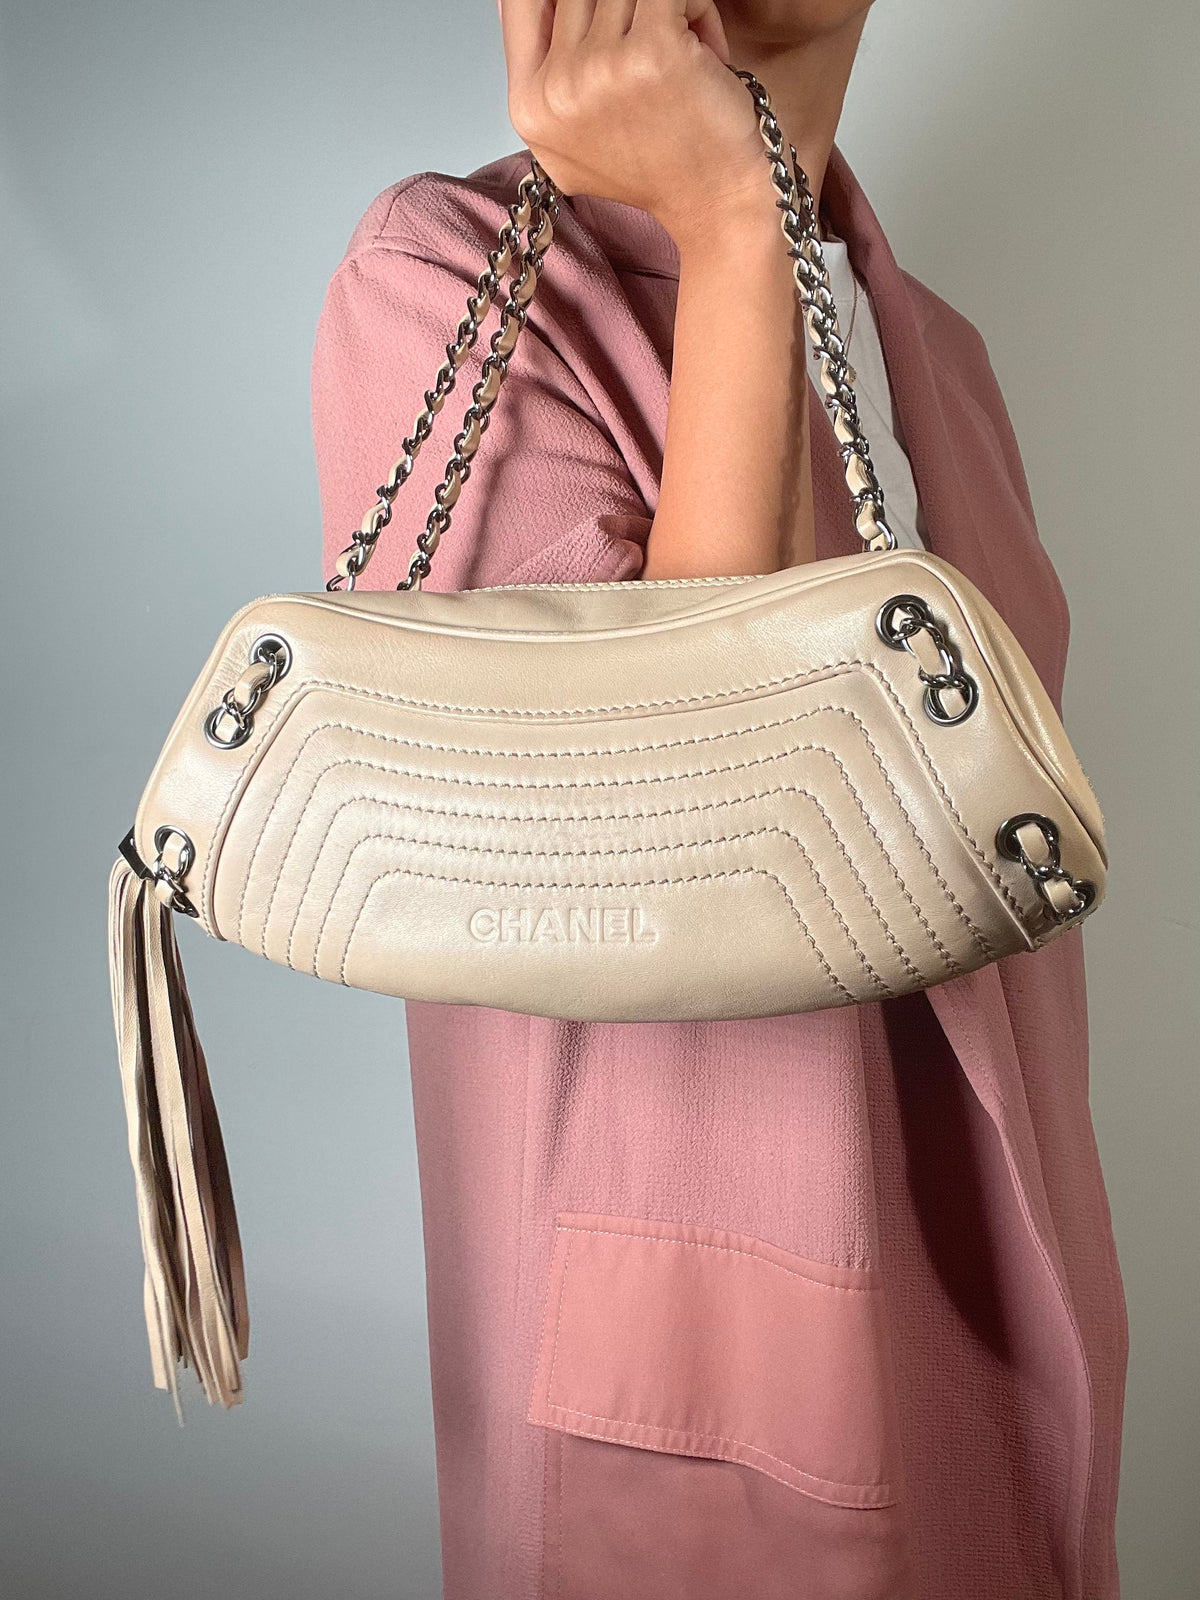 STYLE Chanel Gabrielle : 8 Different Ways To Carry it